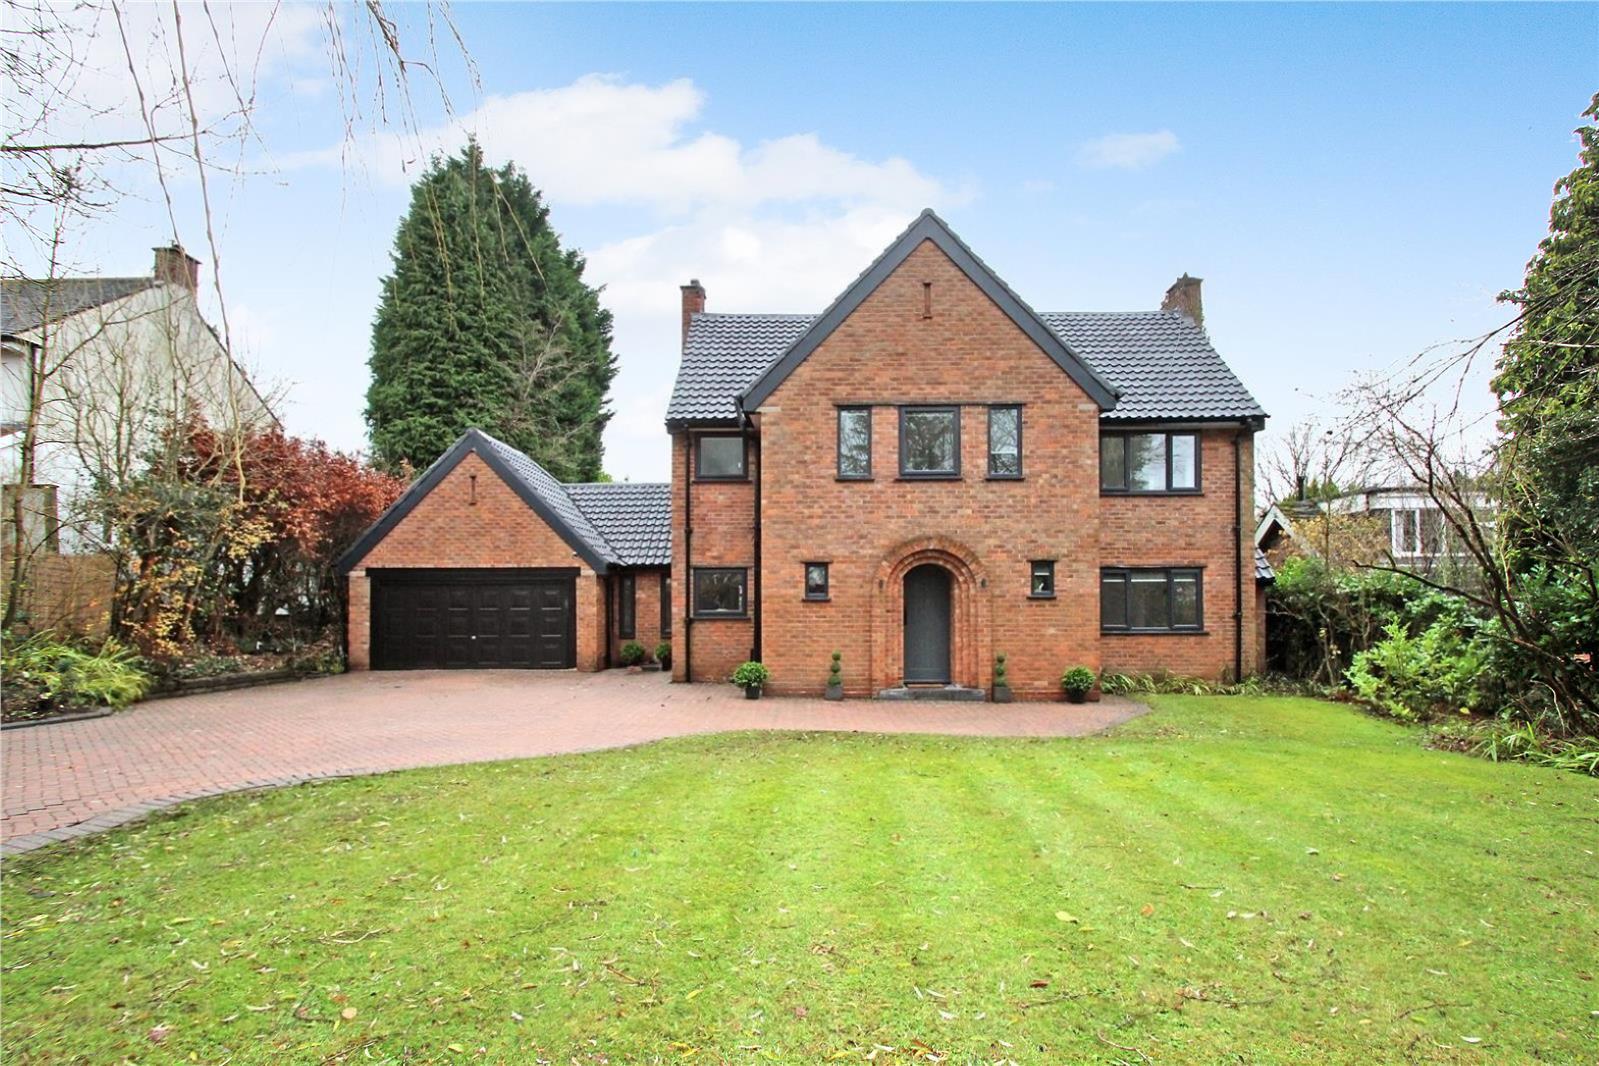 4 bed detached house to rent in Carrwood, Hale Barns - Property Image 1